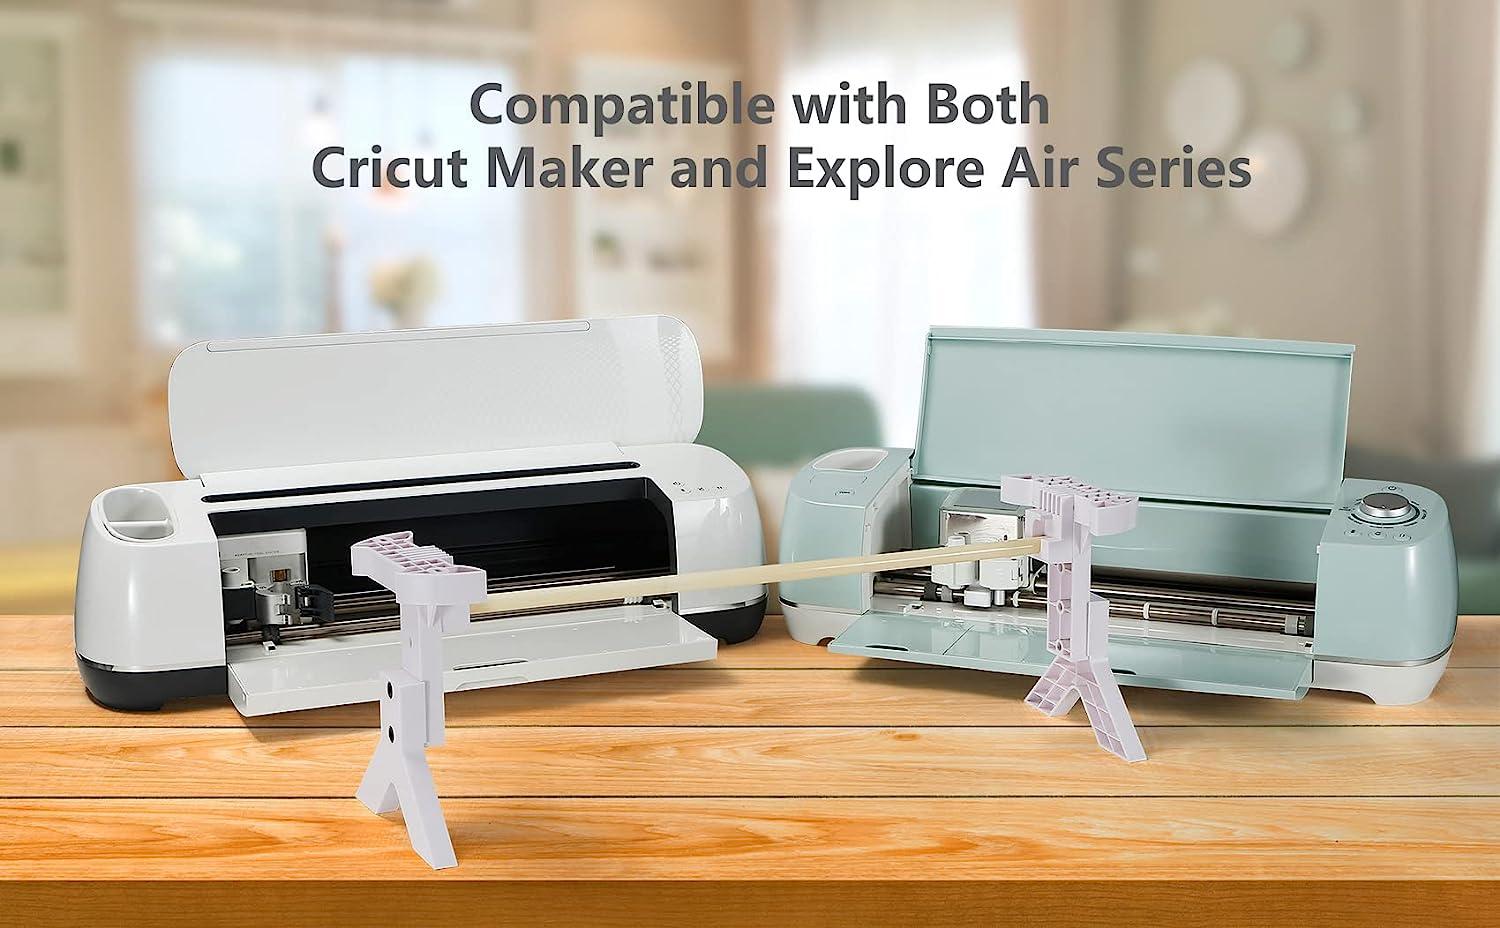 Legs Compatible with Cricut Maker Series and Explore Air Series, Space Expansion